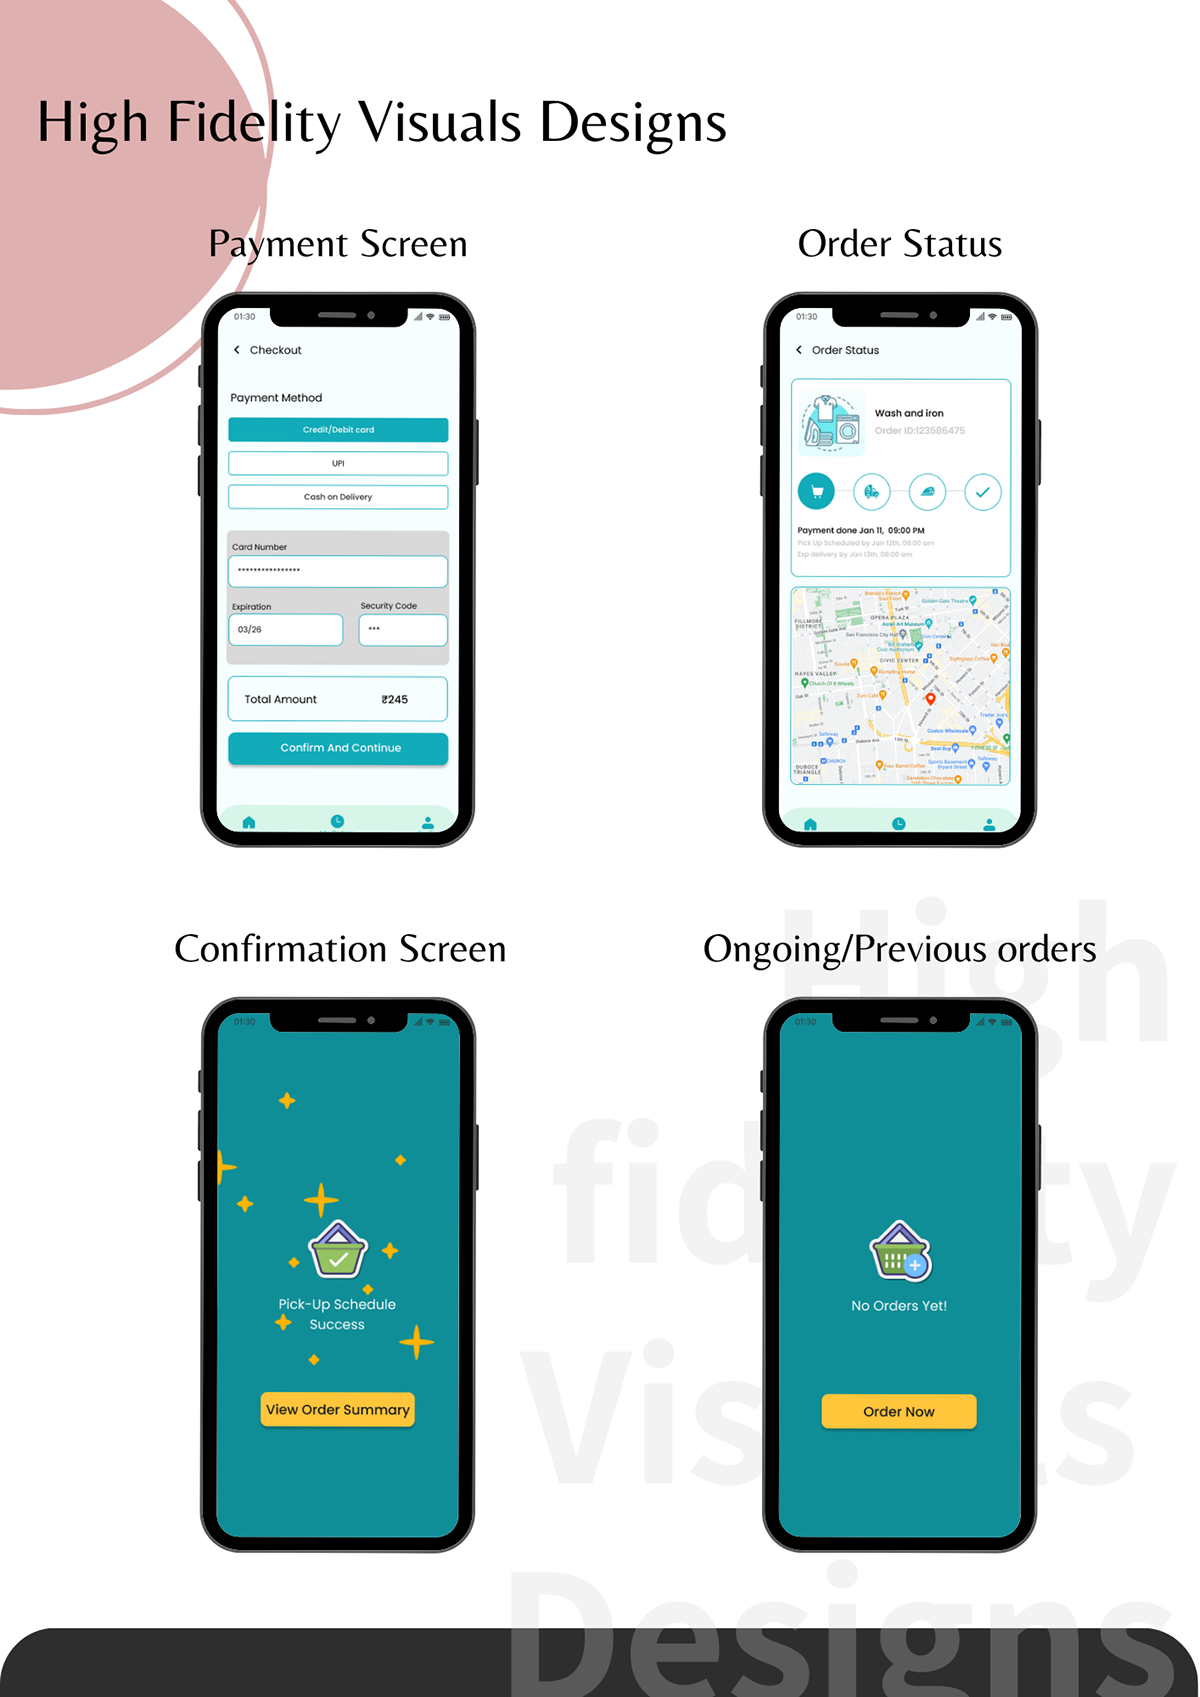 design Figma UI/UX Mobile app user experience ui design UX design Case Study laundry Drycleaning 